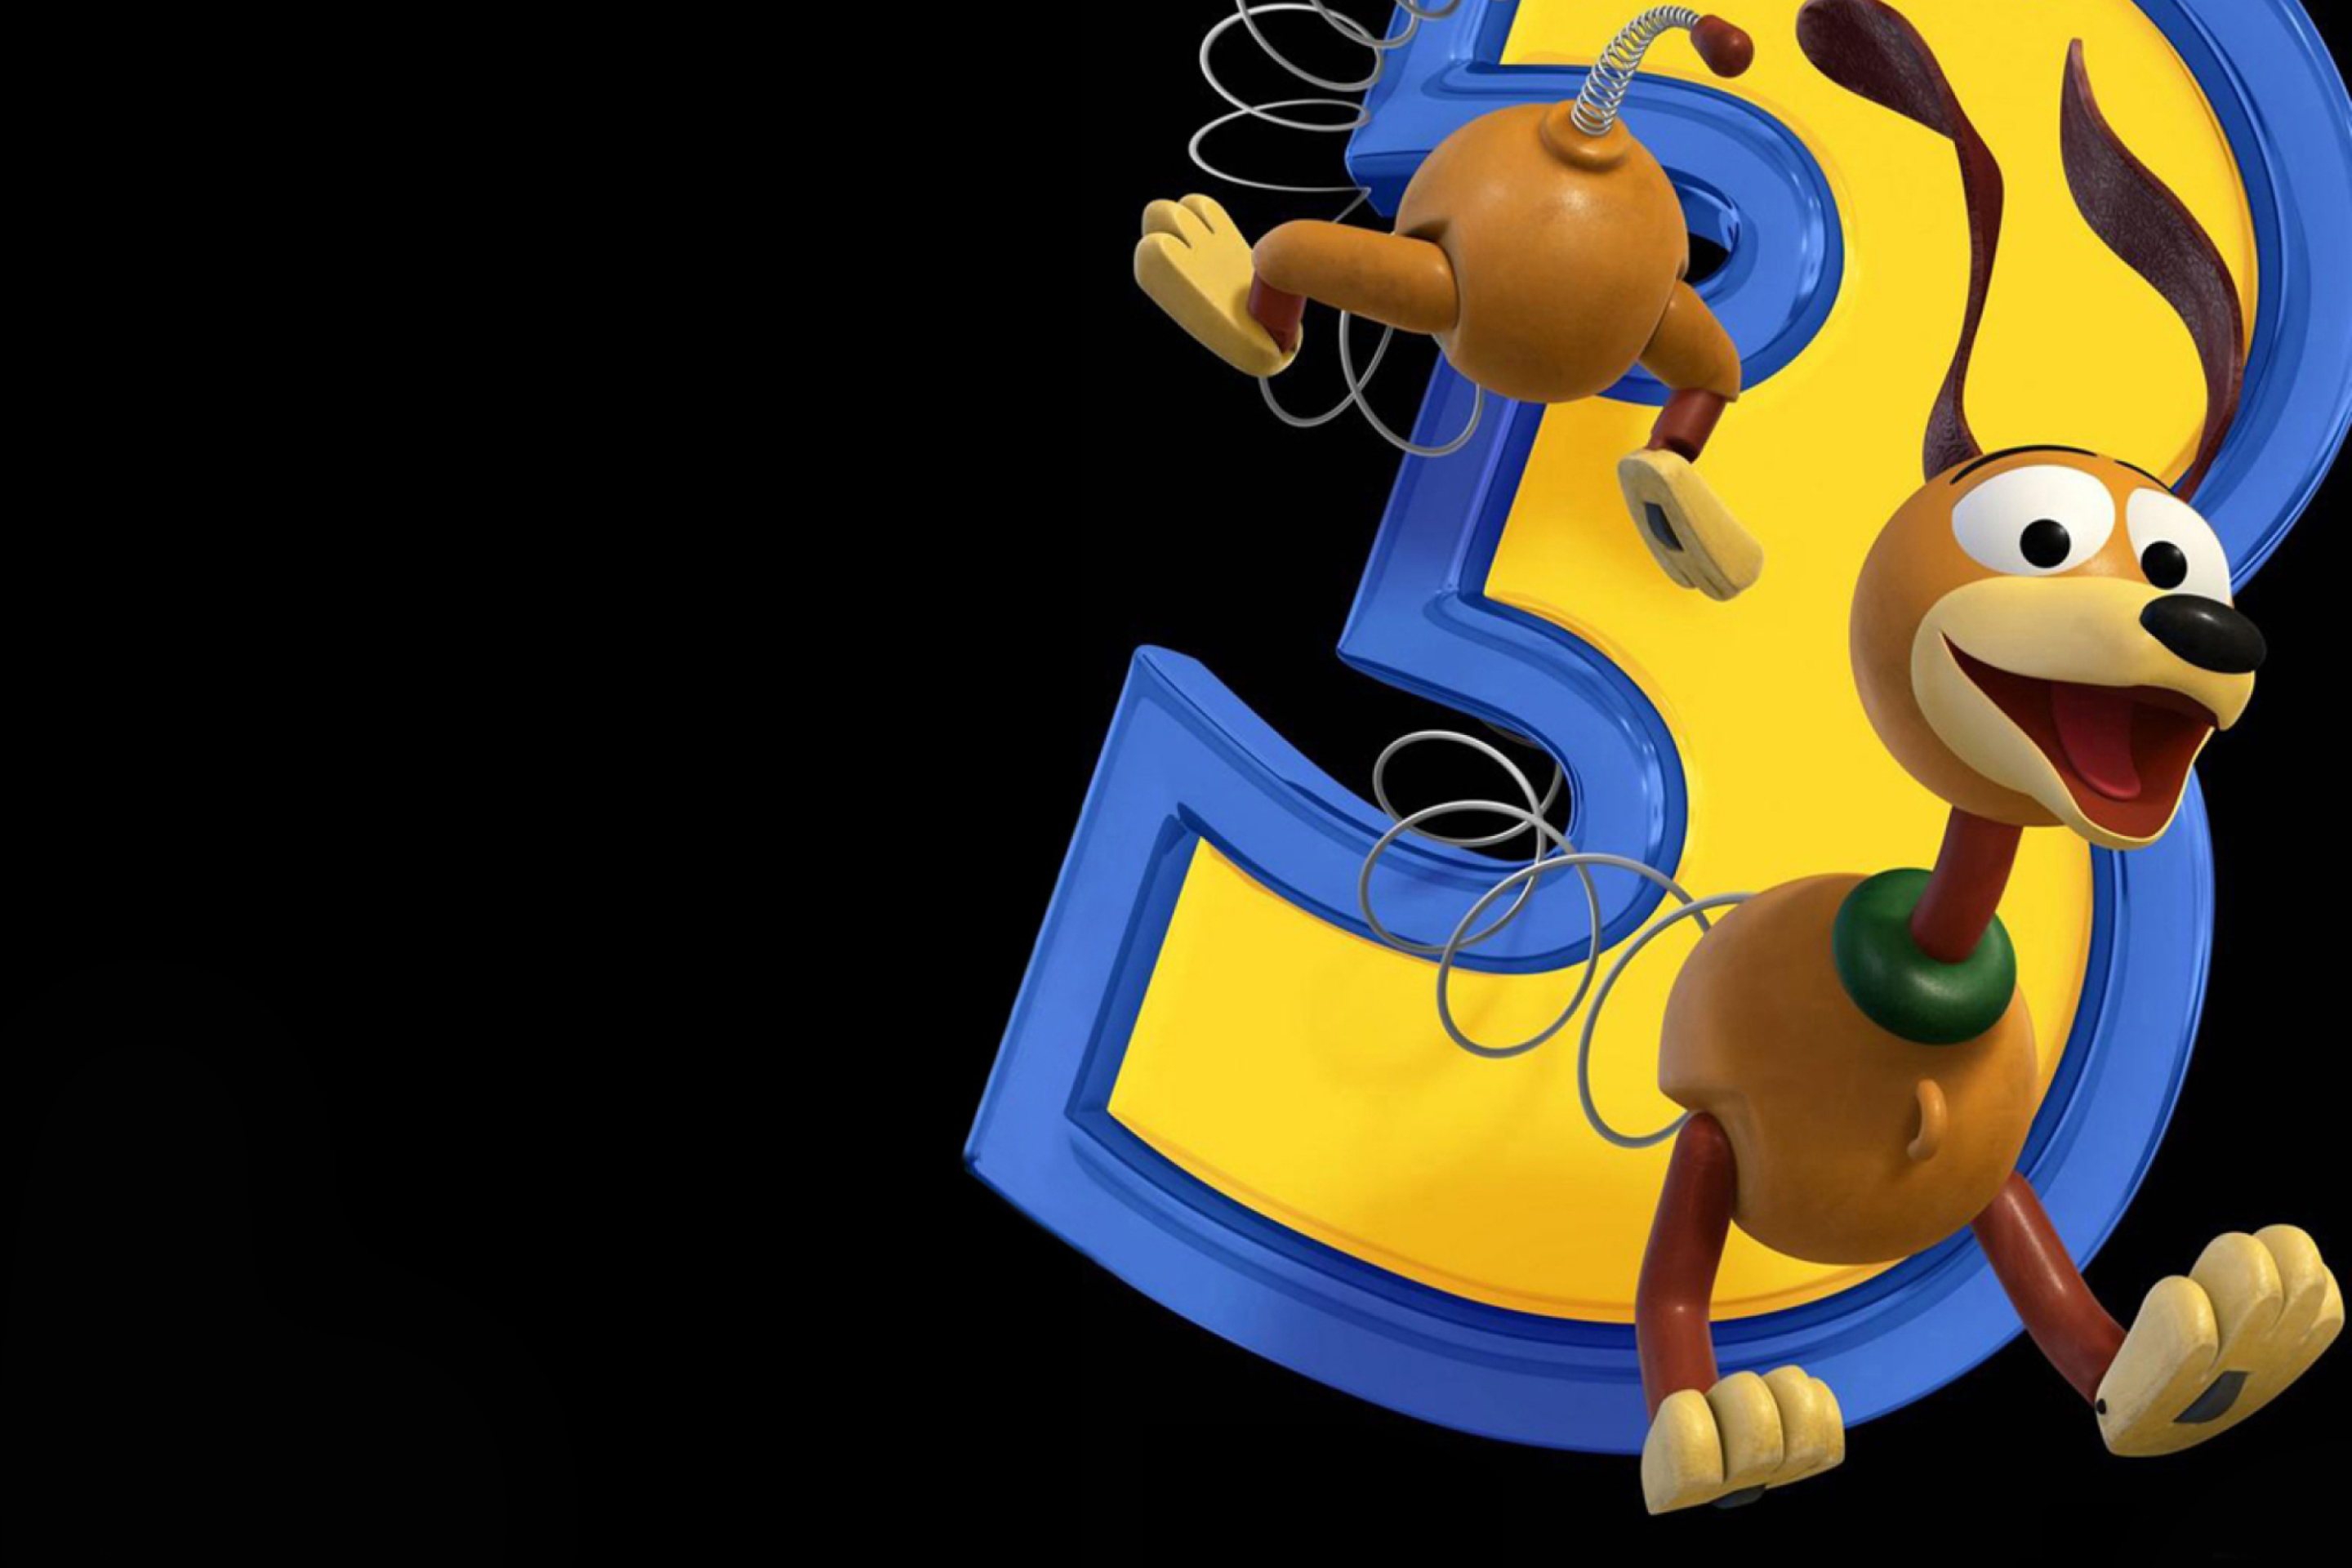 Dog From Toy Story 3 wallpaper 2880x1920